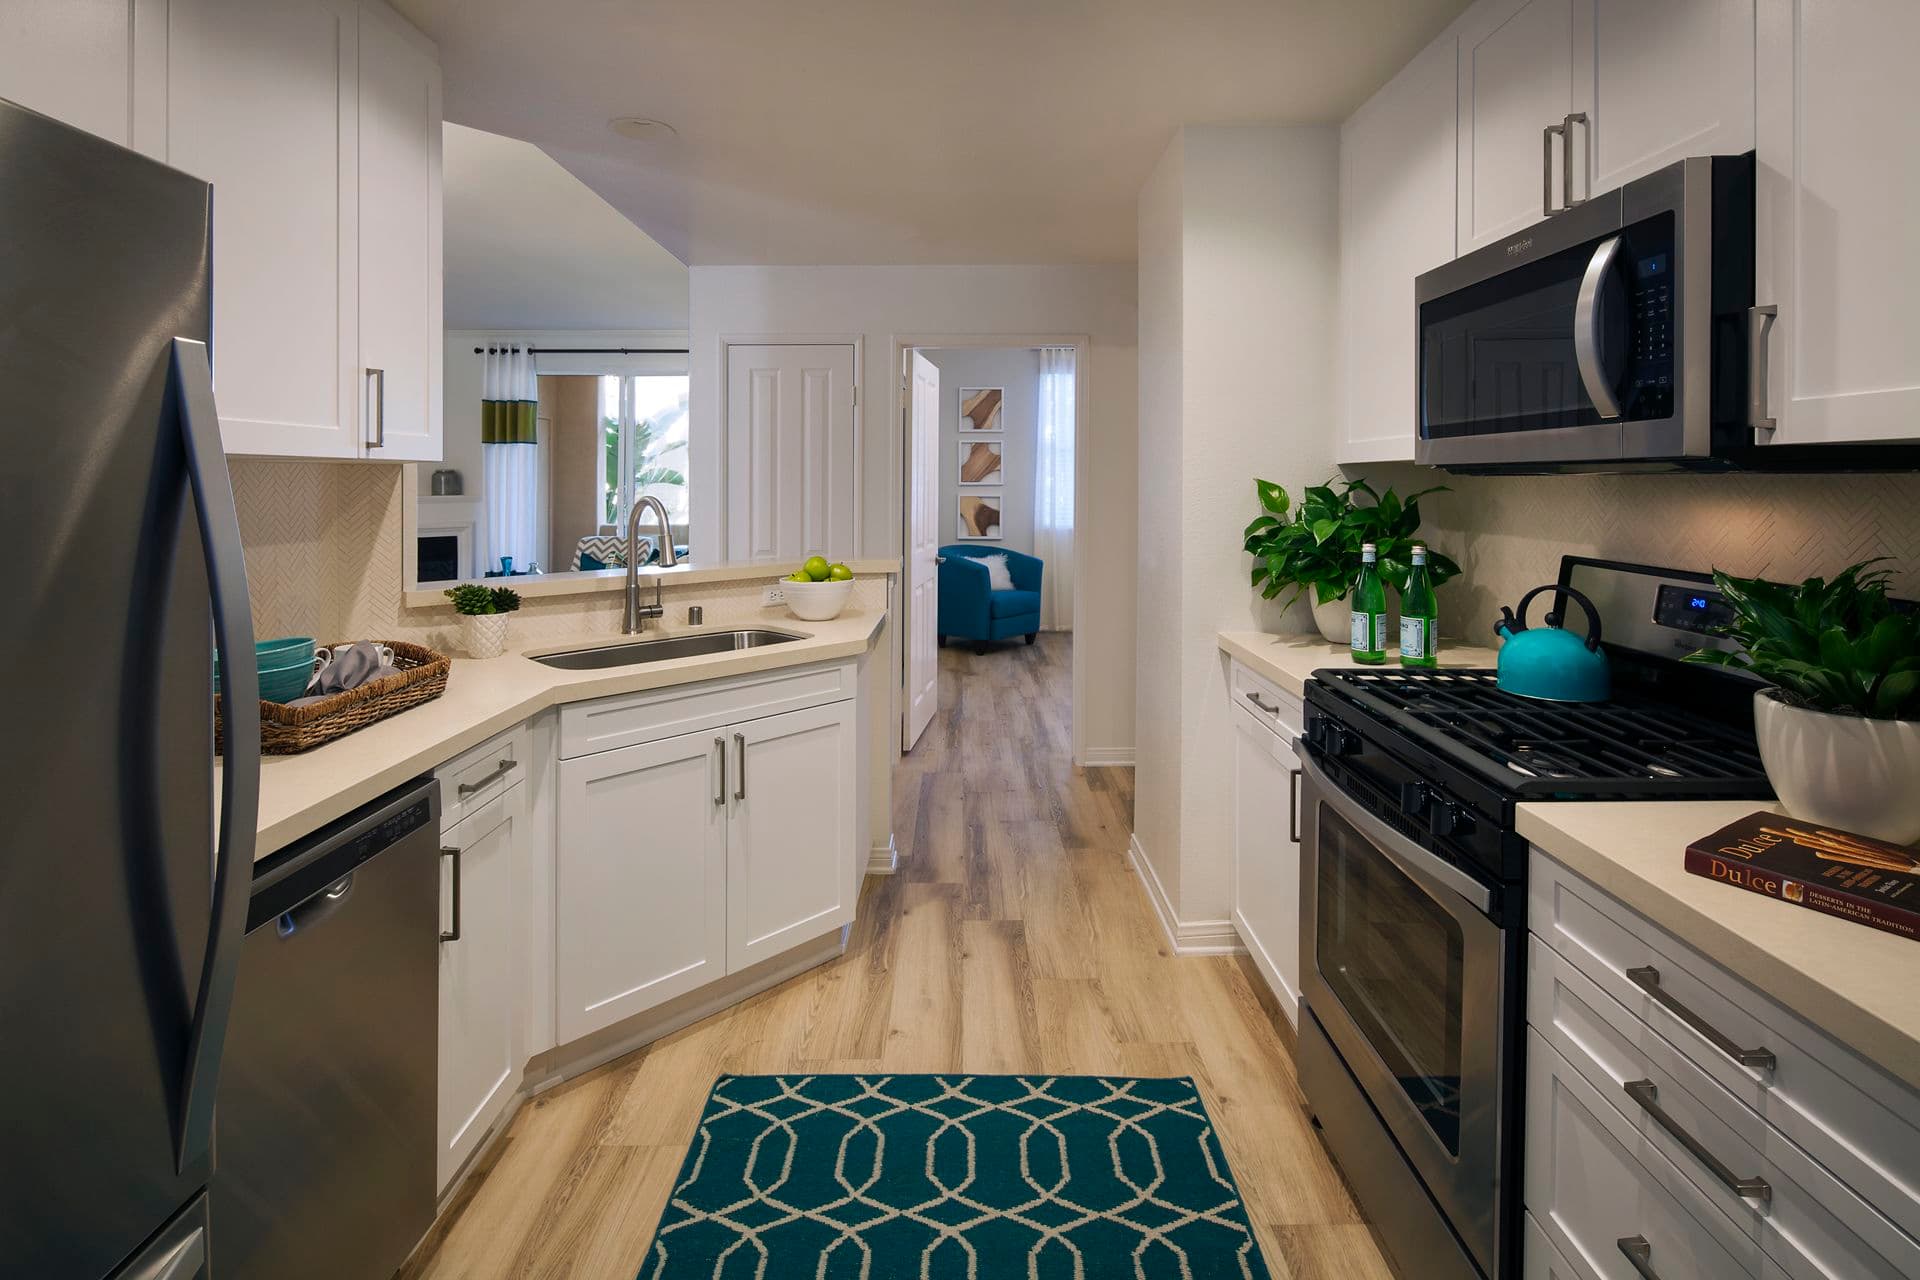 Interior view of kitchen at Somerset Apartment Homes in Irvine, CA.